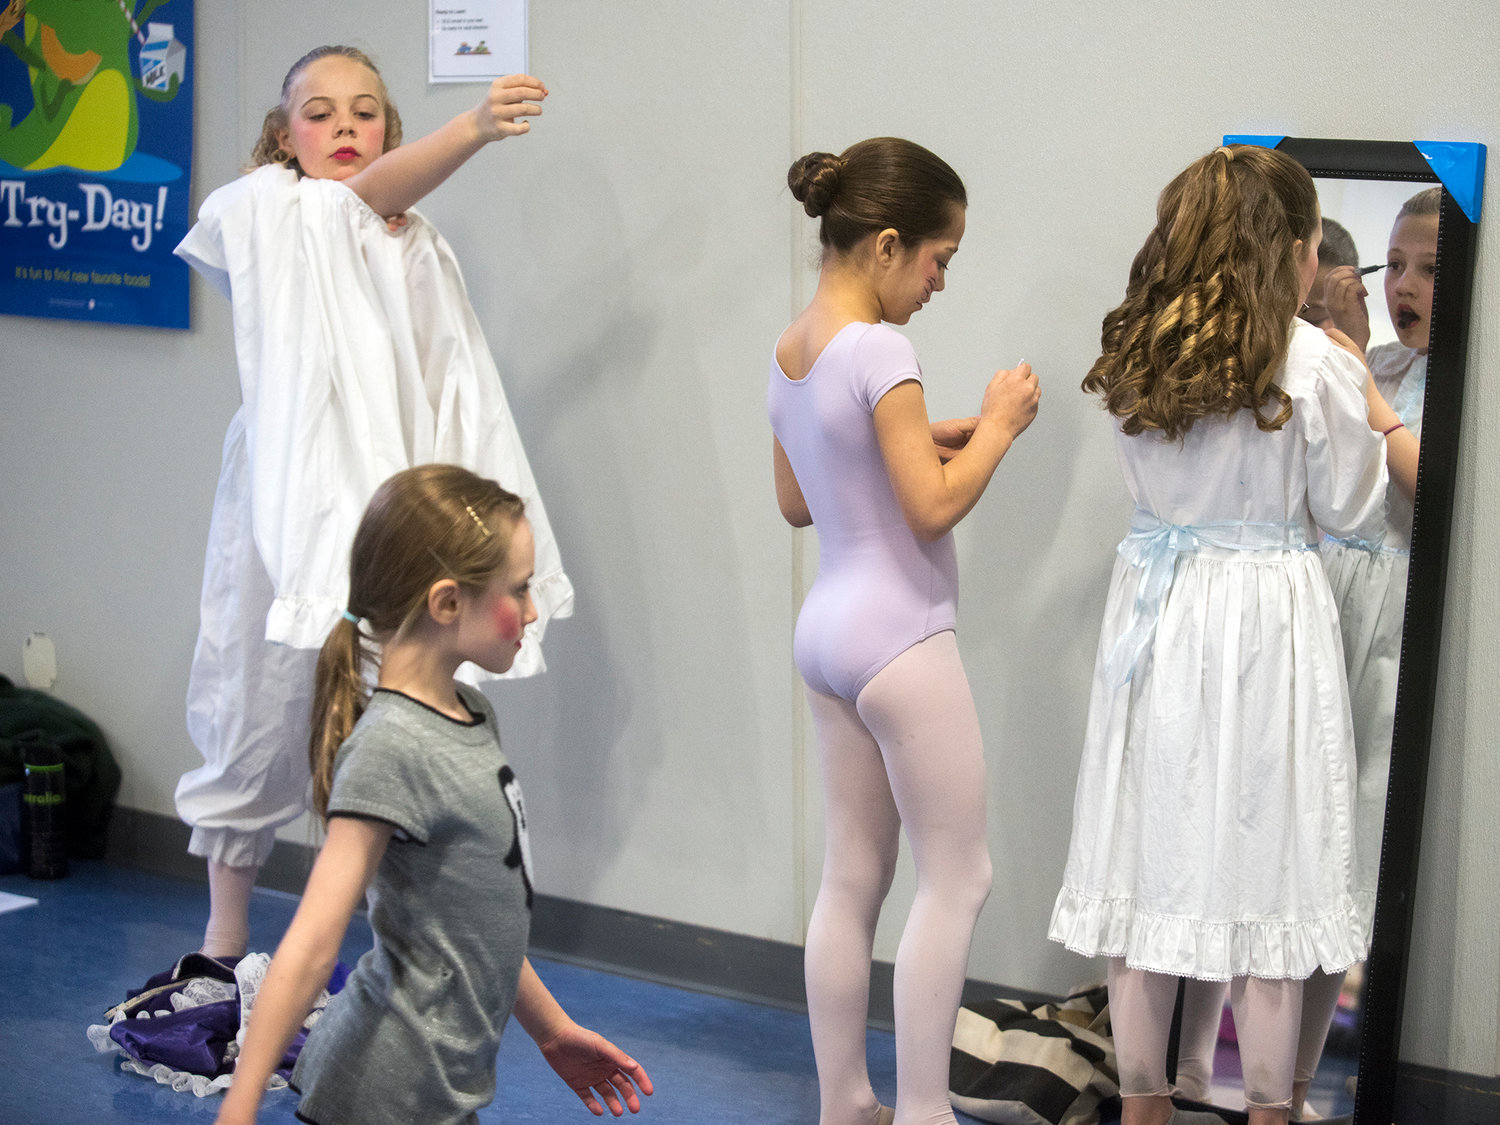 The cast of the Nutcracker prepare their costumes prior to taking the stage for the first of two Saturday performances in Pe Ell.